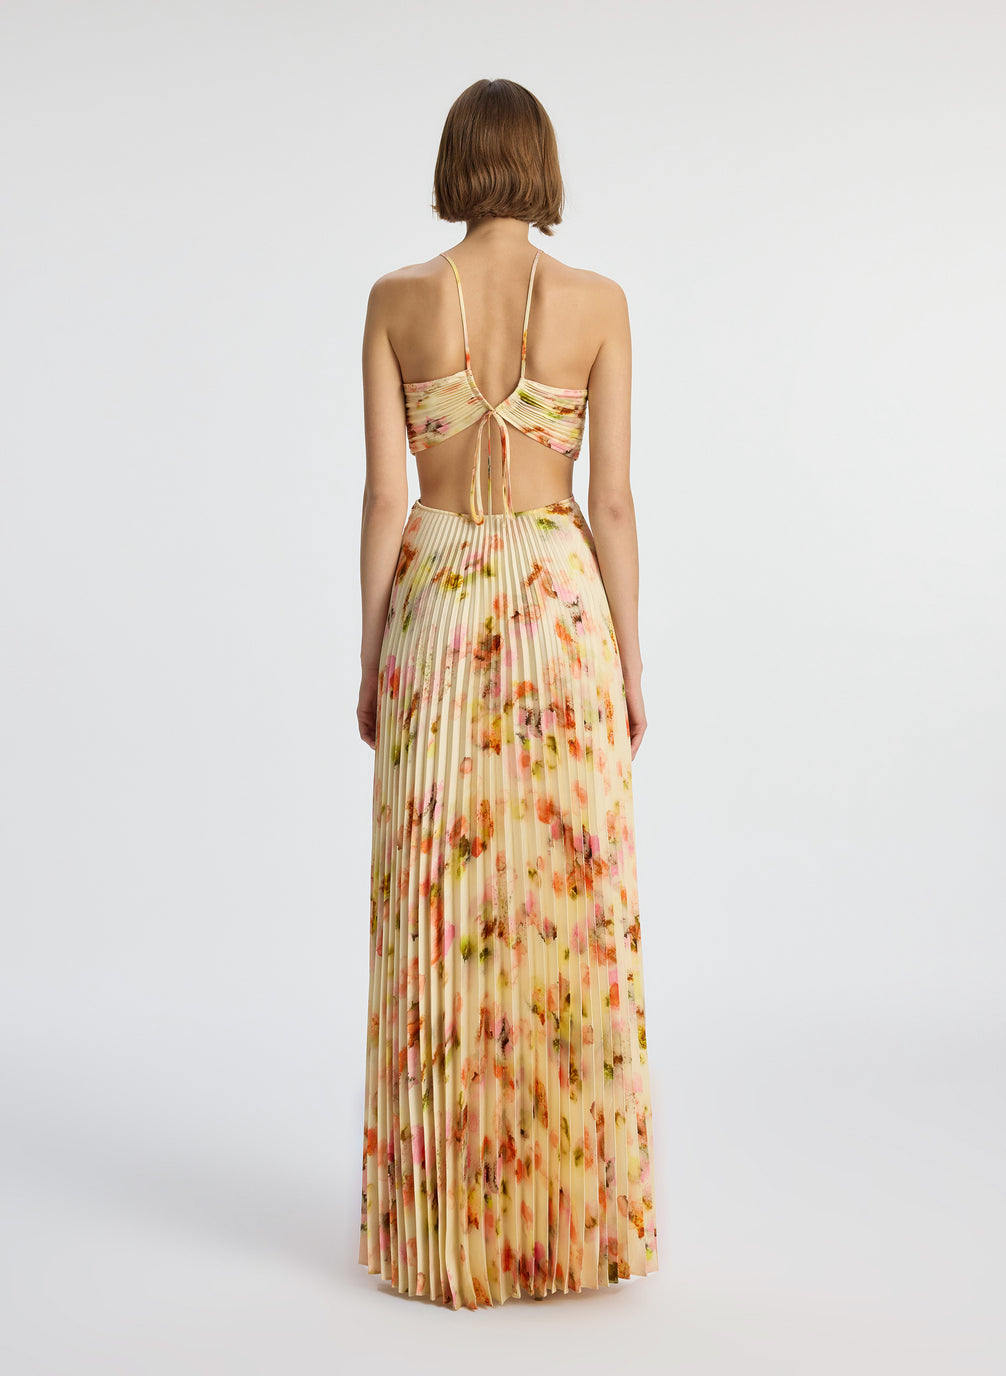 back view of woman wearing yellow pleated maxi dress